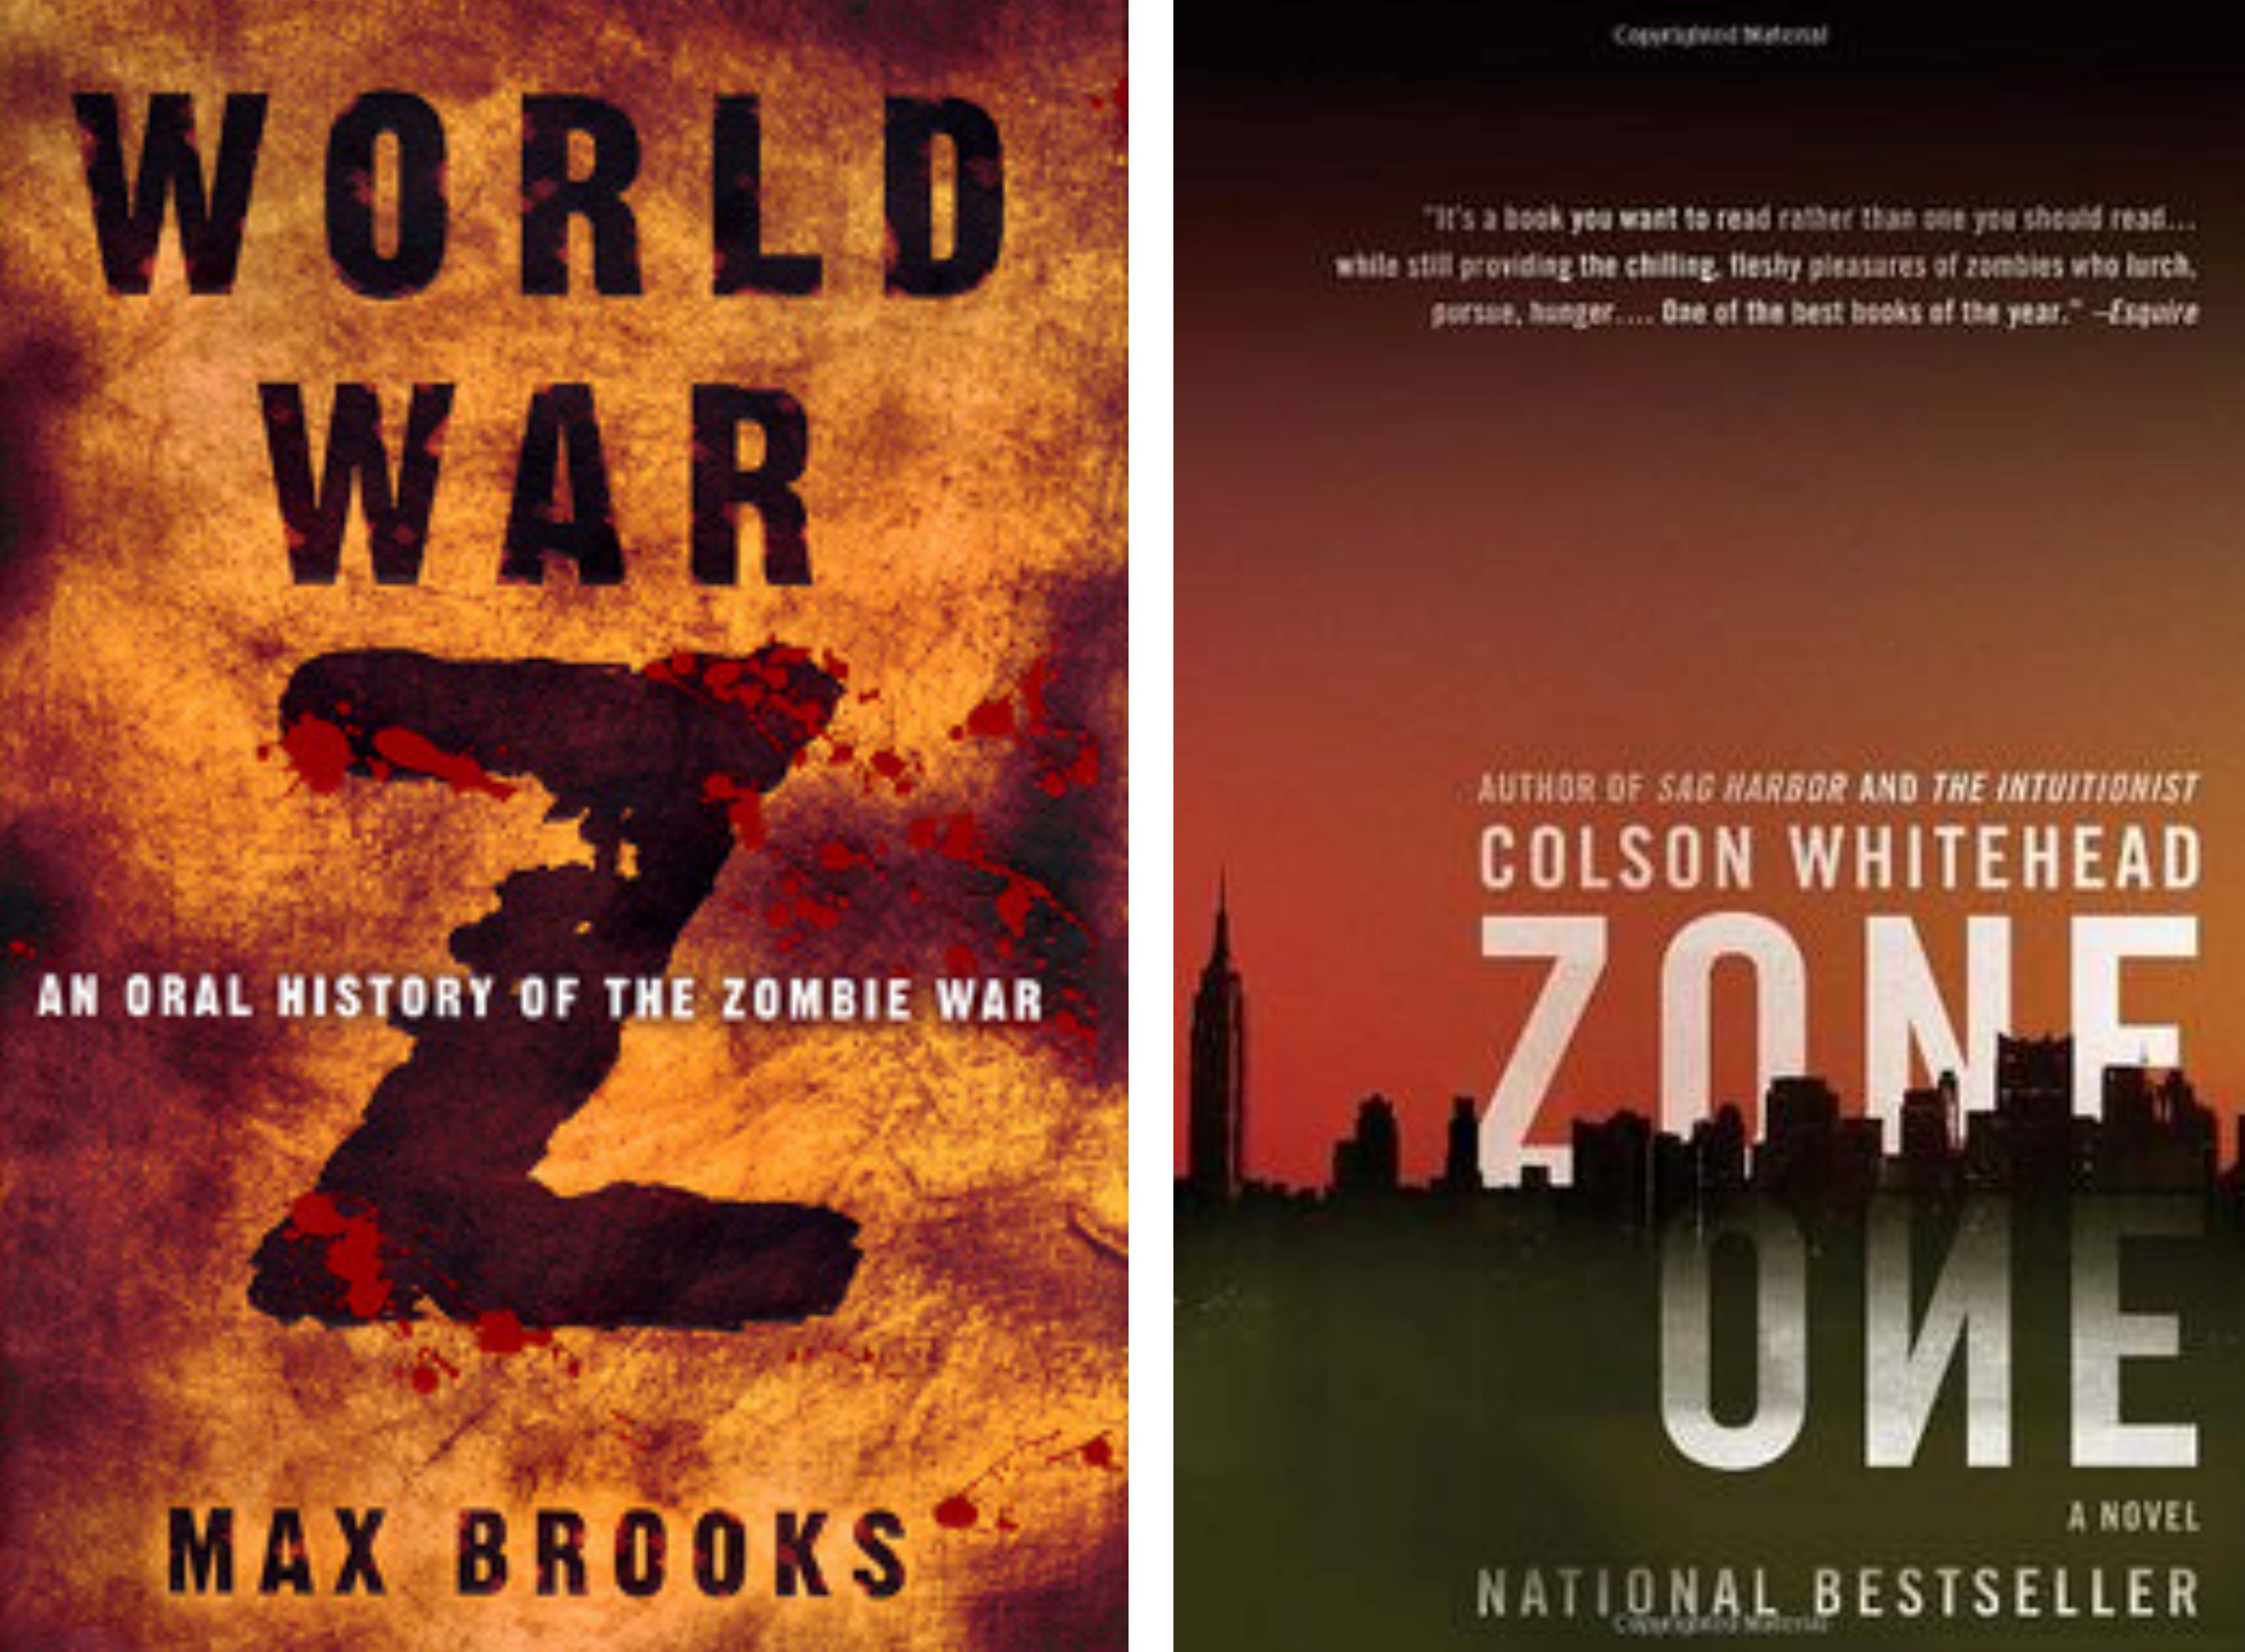 Covers of the 2006 book World War Z by Max Brooks (left), and 2011 book Zone One by Colson Whitehead (right).